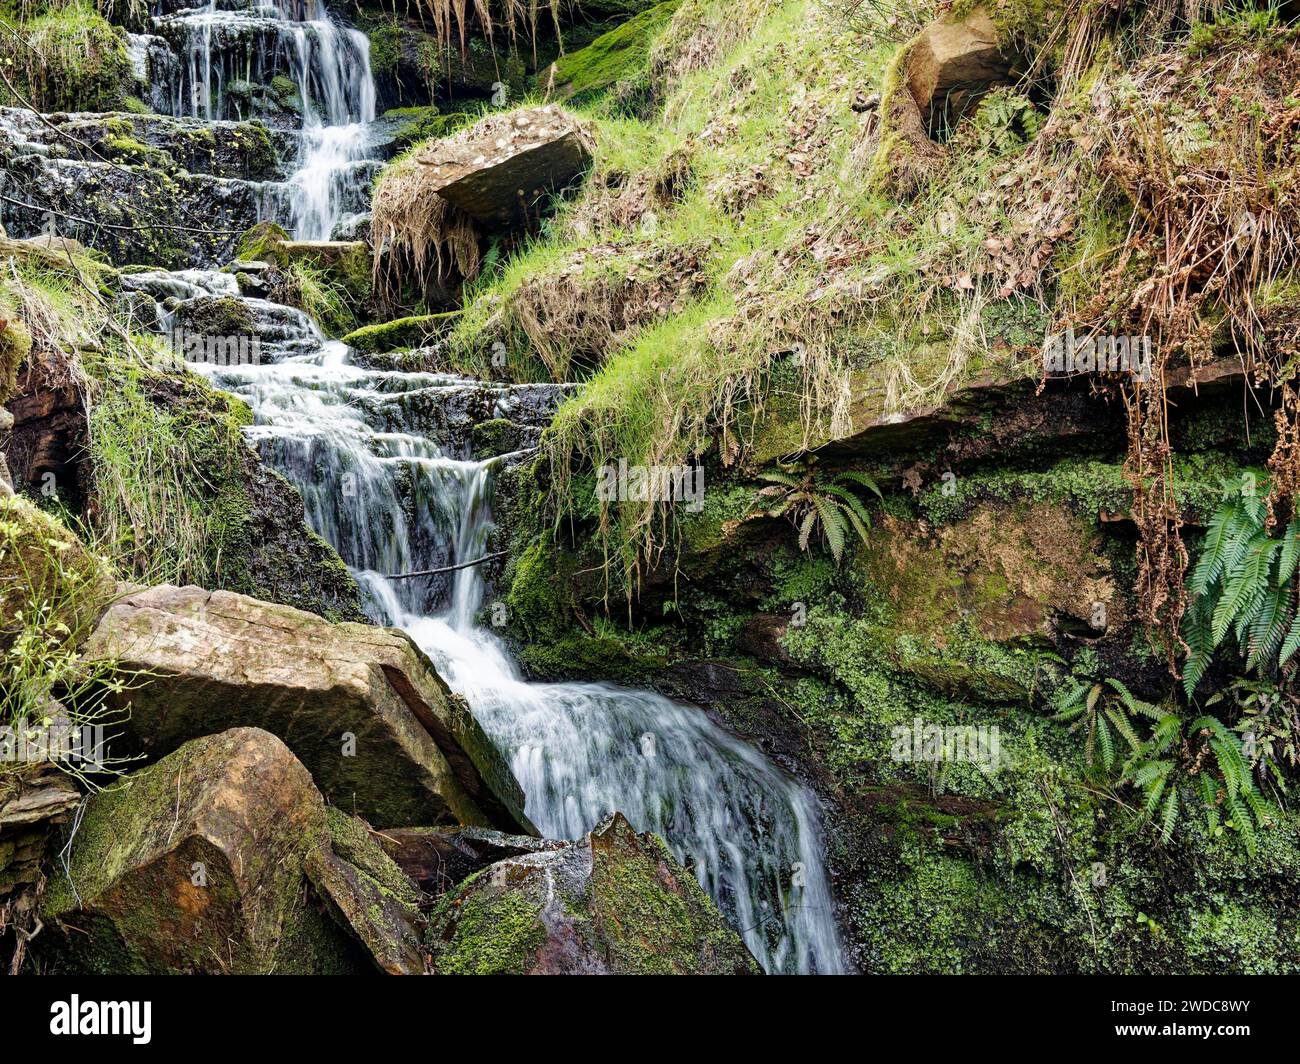 Small, picturesque waterfall flows over moss-covered stones amidst green plants, Bronte waterfall. Haworth. England, Great Britain Stock Photo